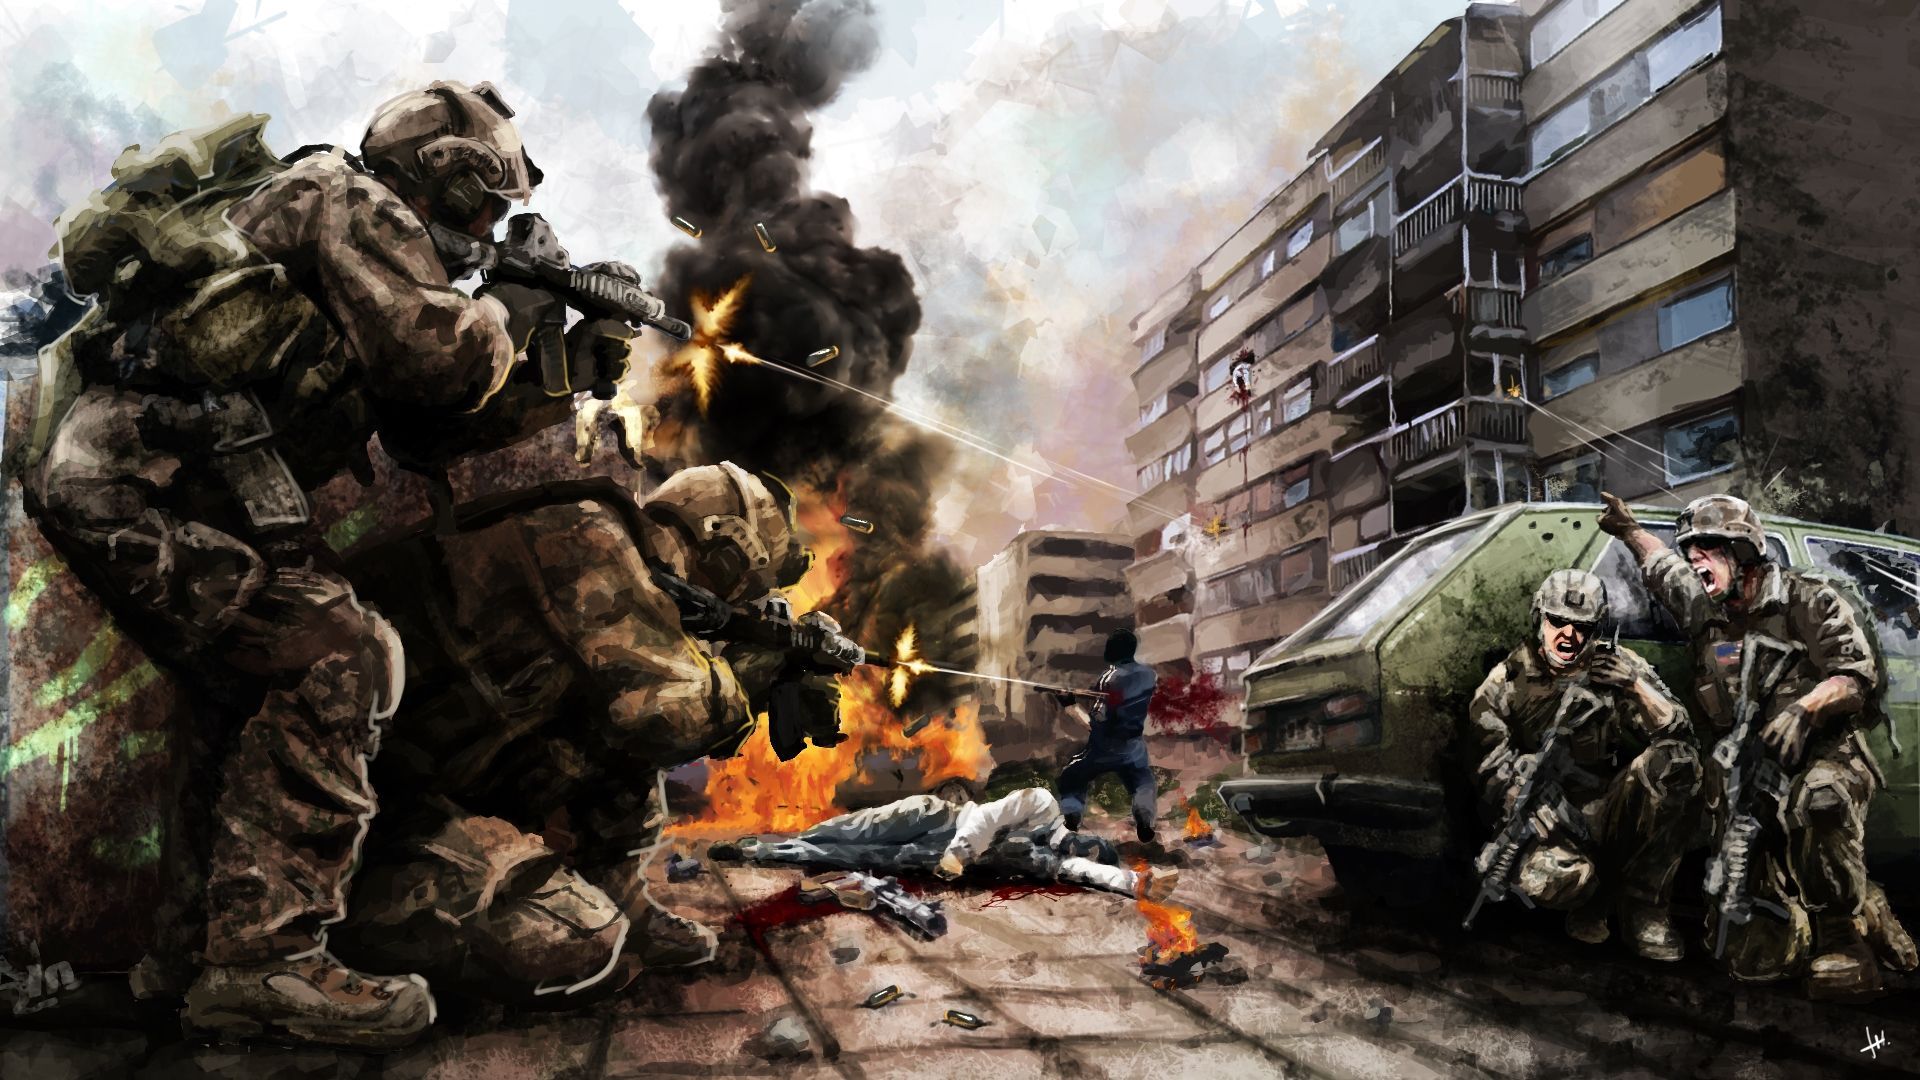 Special Operations Wallpaper Wide. Military art, Military artwork, Military soldiers